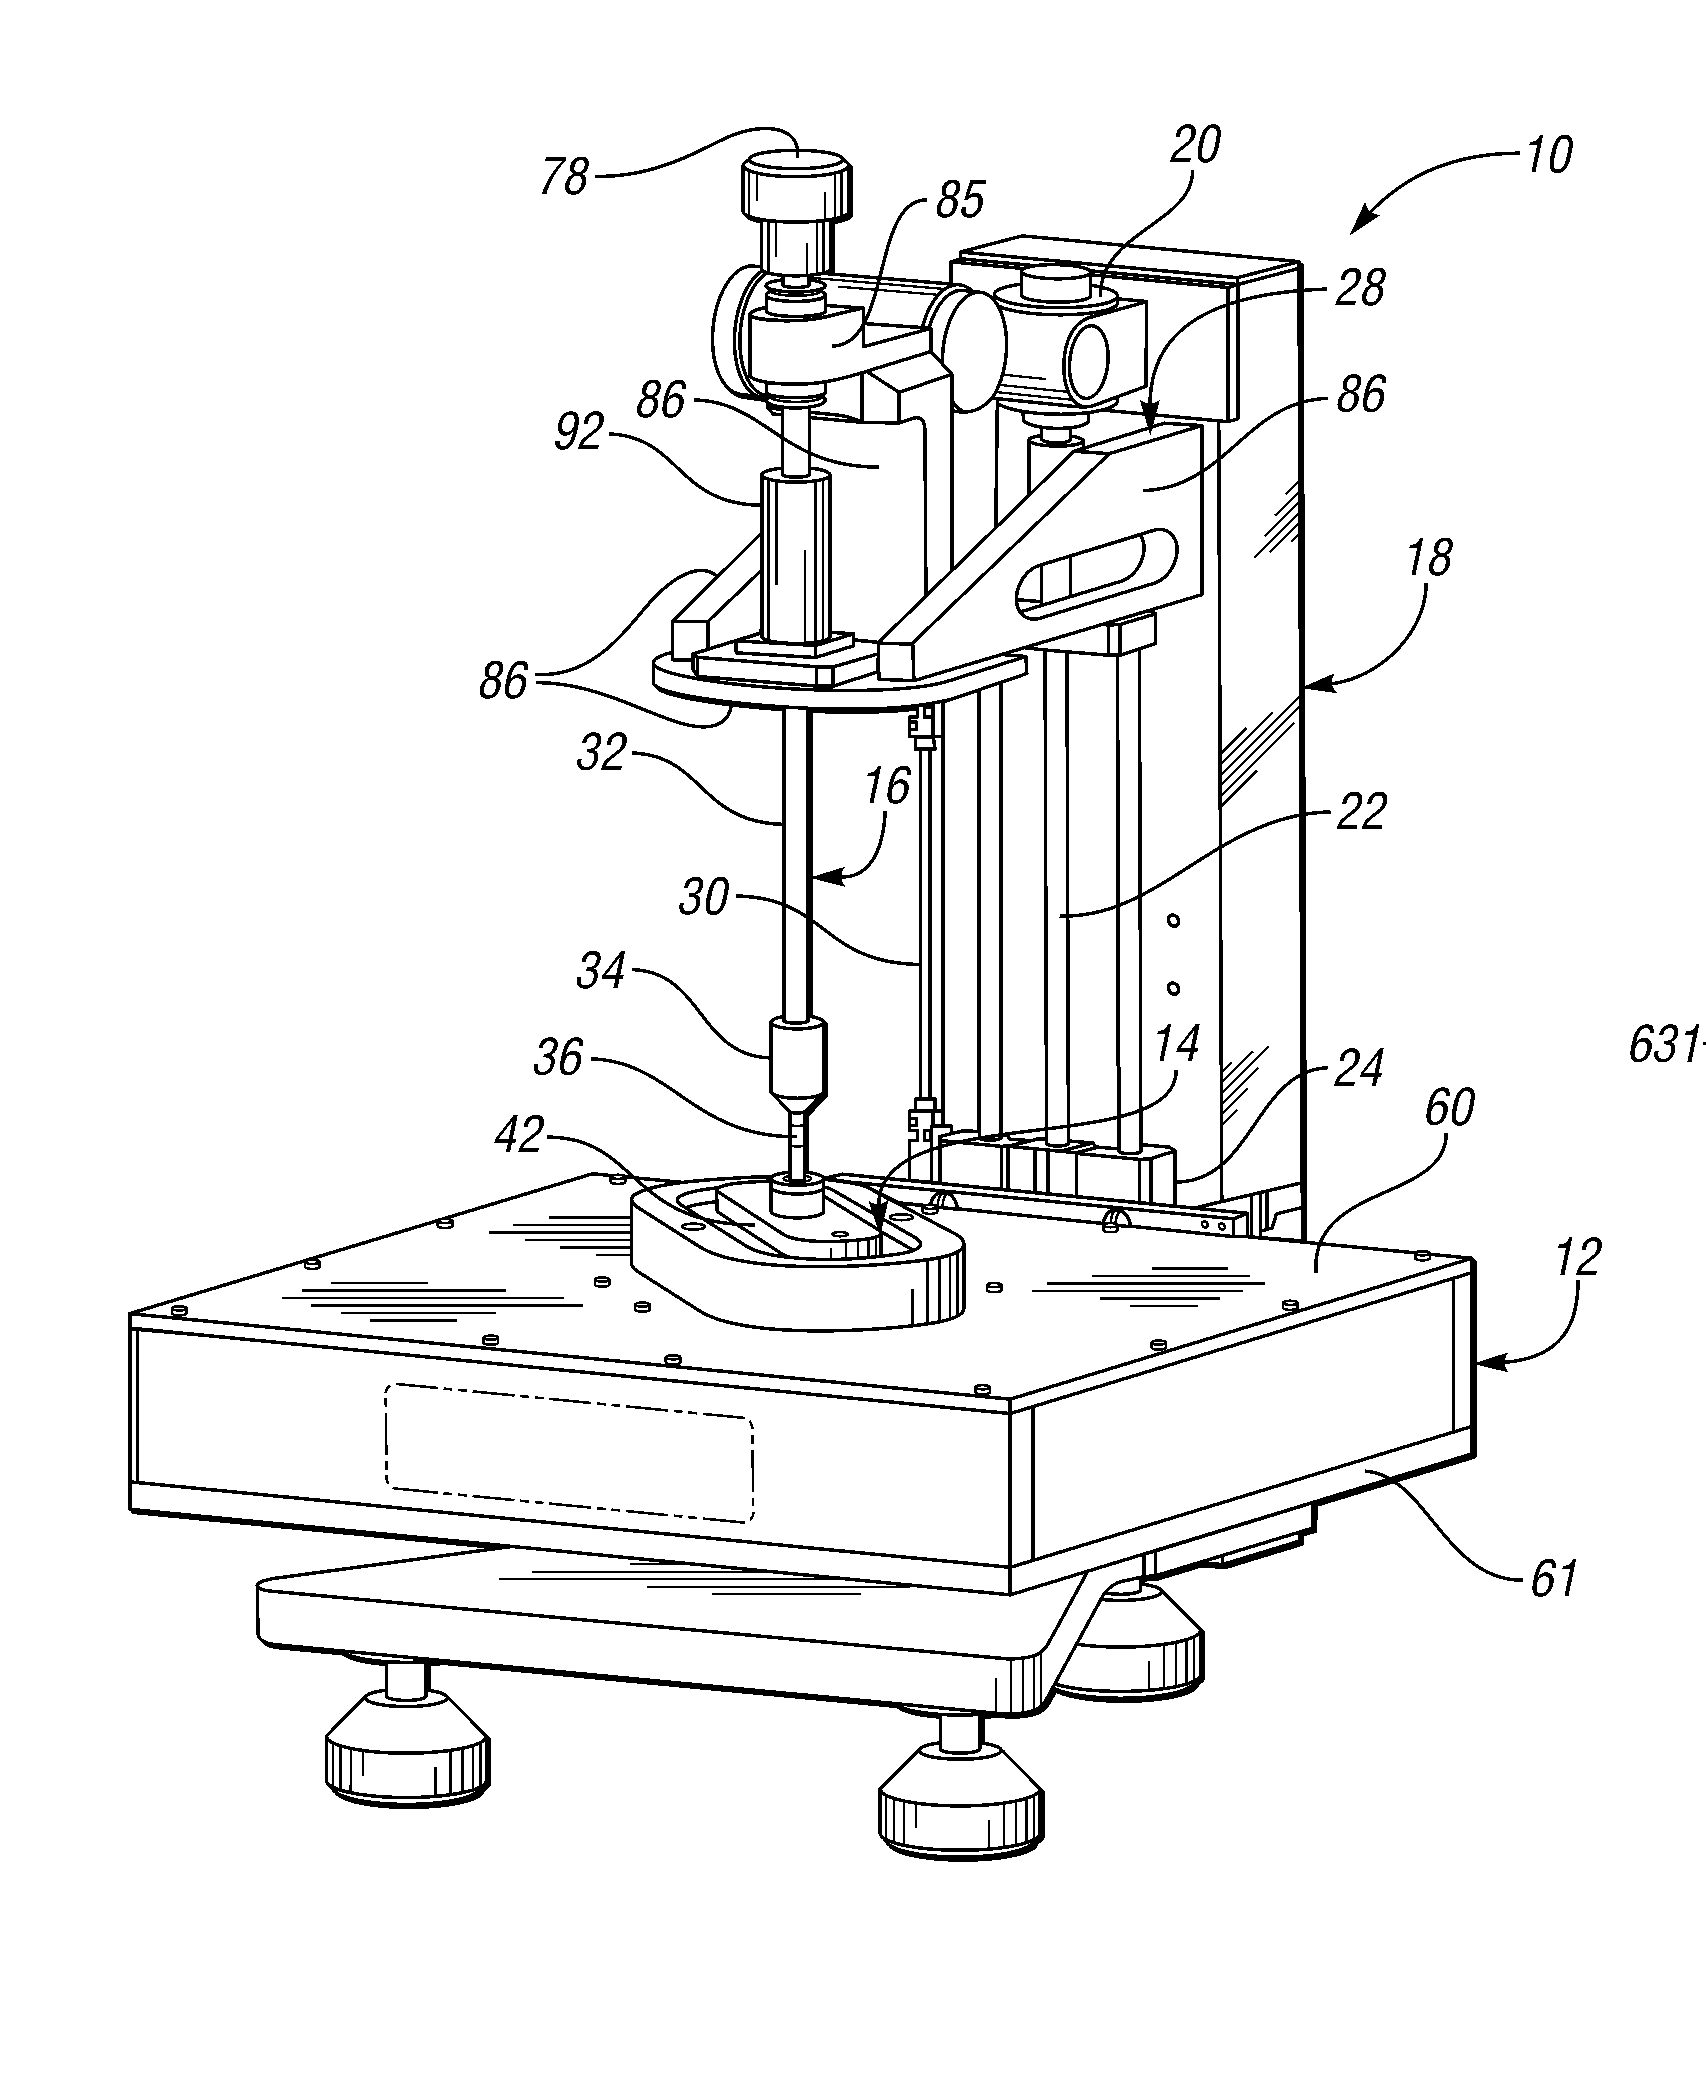 Method For Precisely Measuring Position Of A Part To Be Inspected At A Part Inspection Station